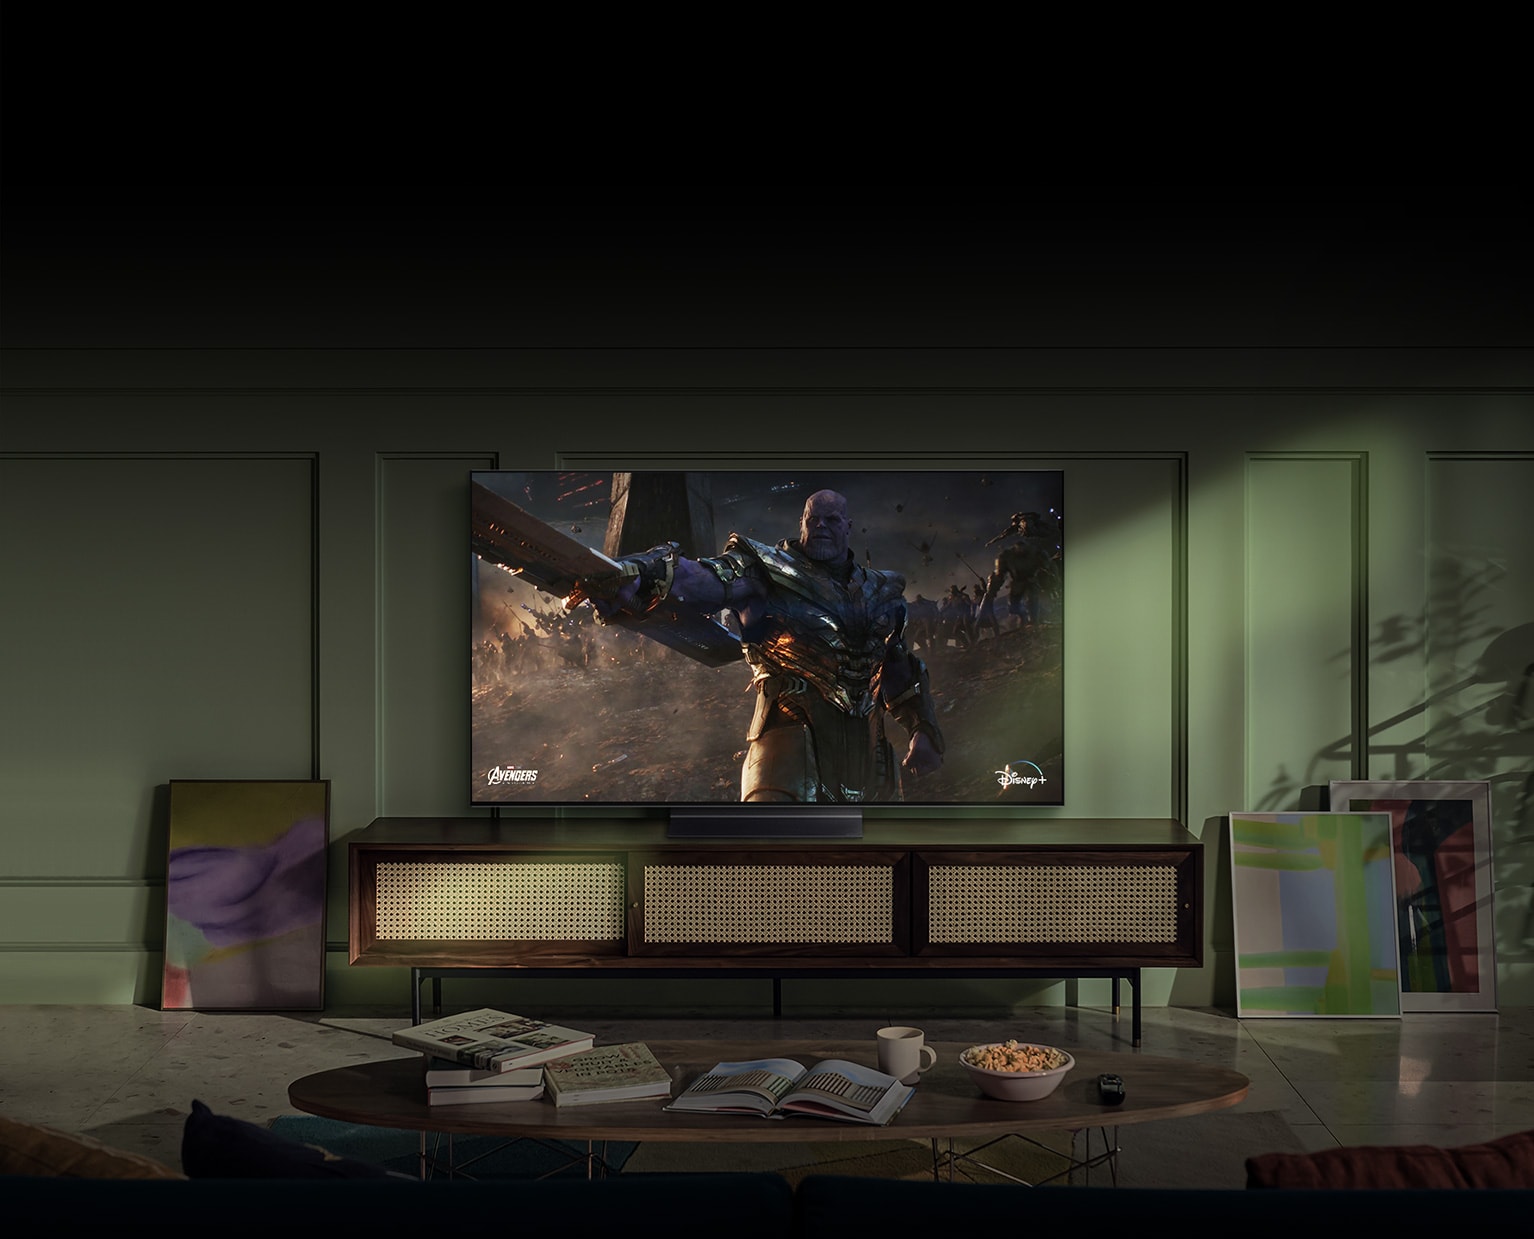 A large wall-mounted LG OLED television shows an action movie scene